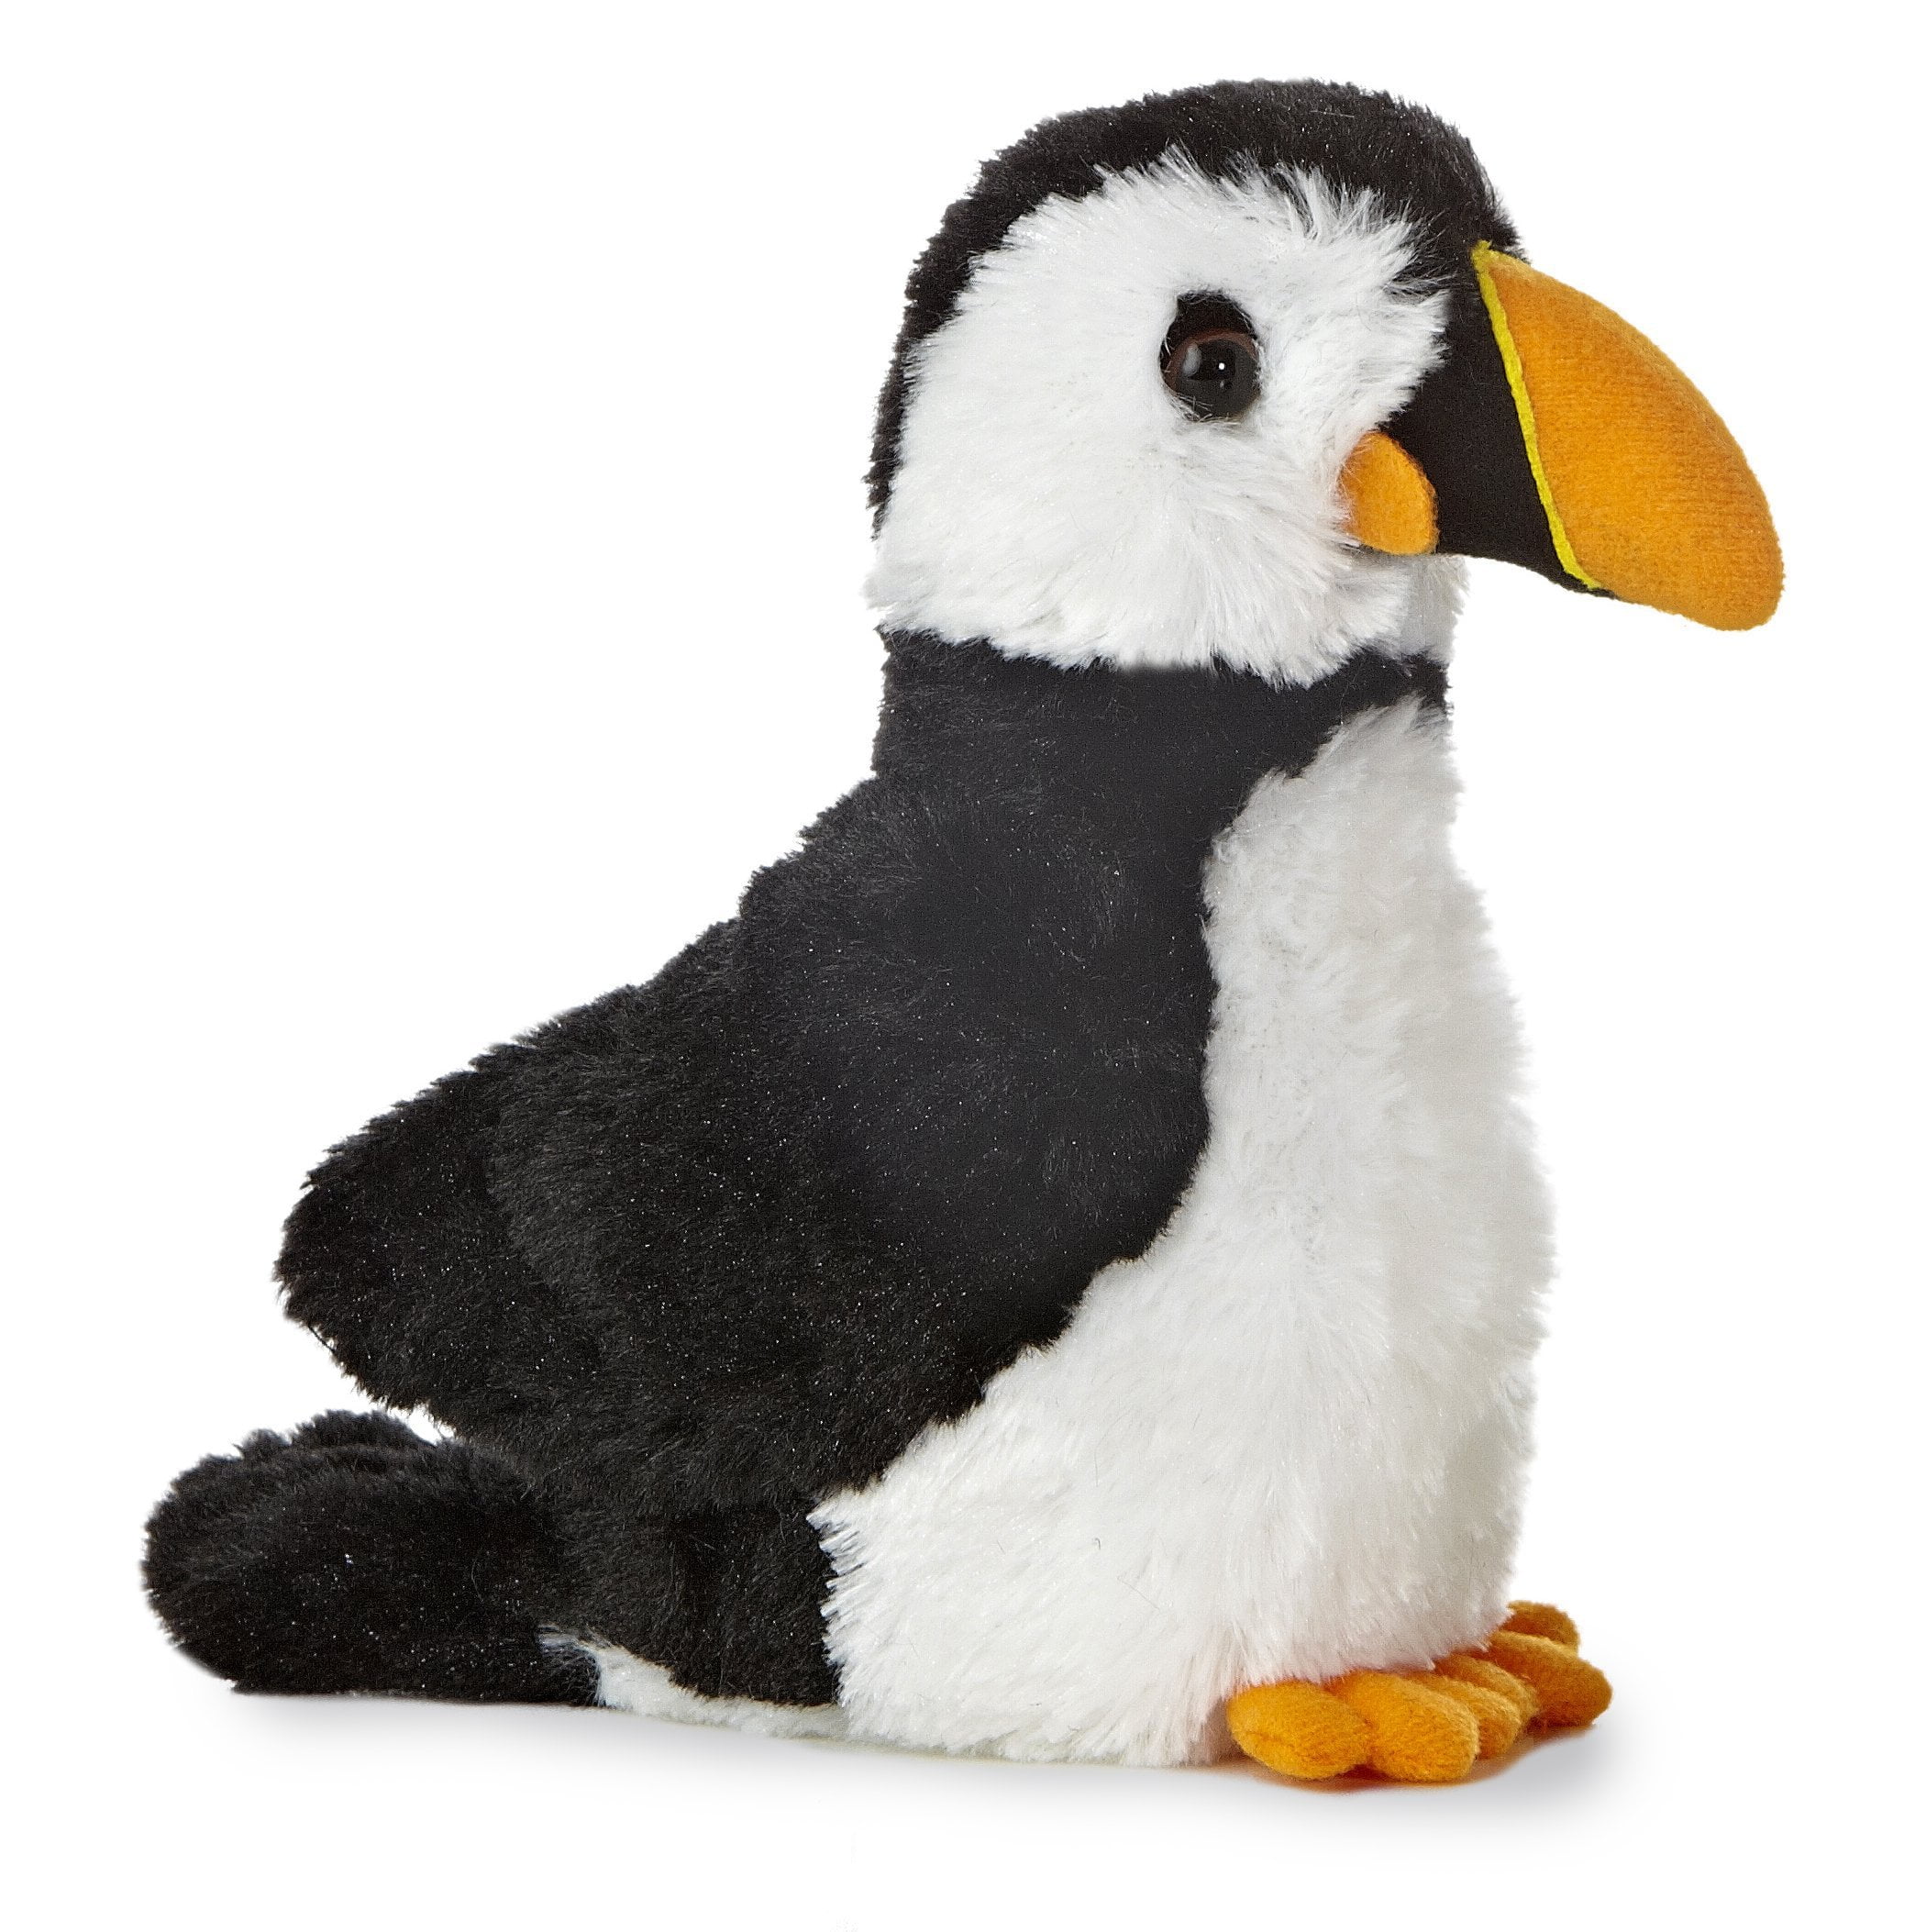 Puffer the Puffin Details about   Ty Beanie Baby #4181 Free Ship 